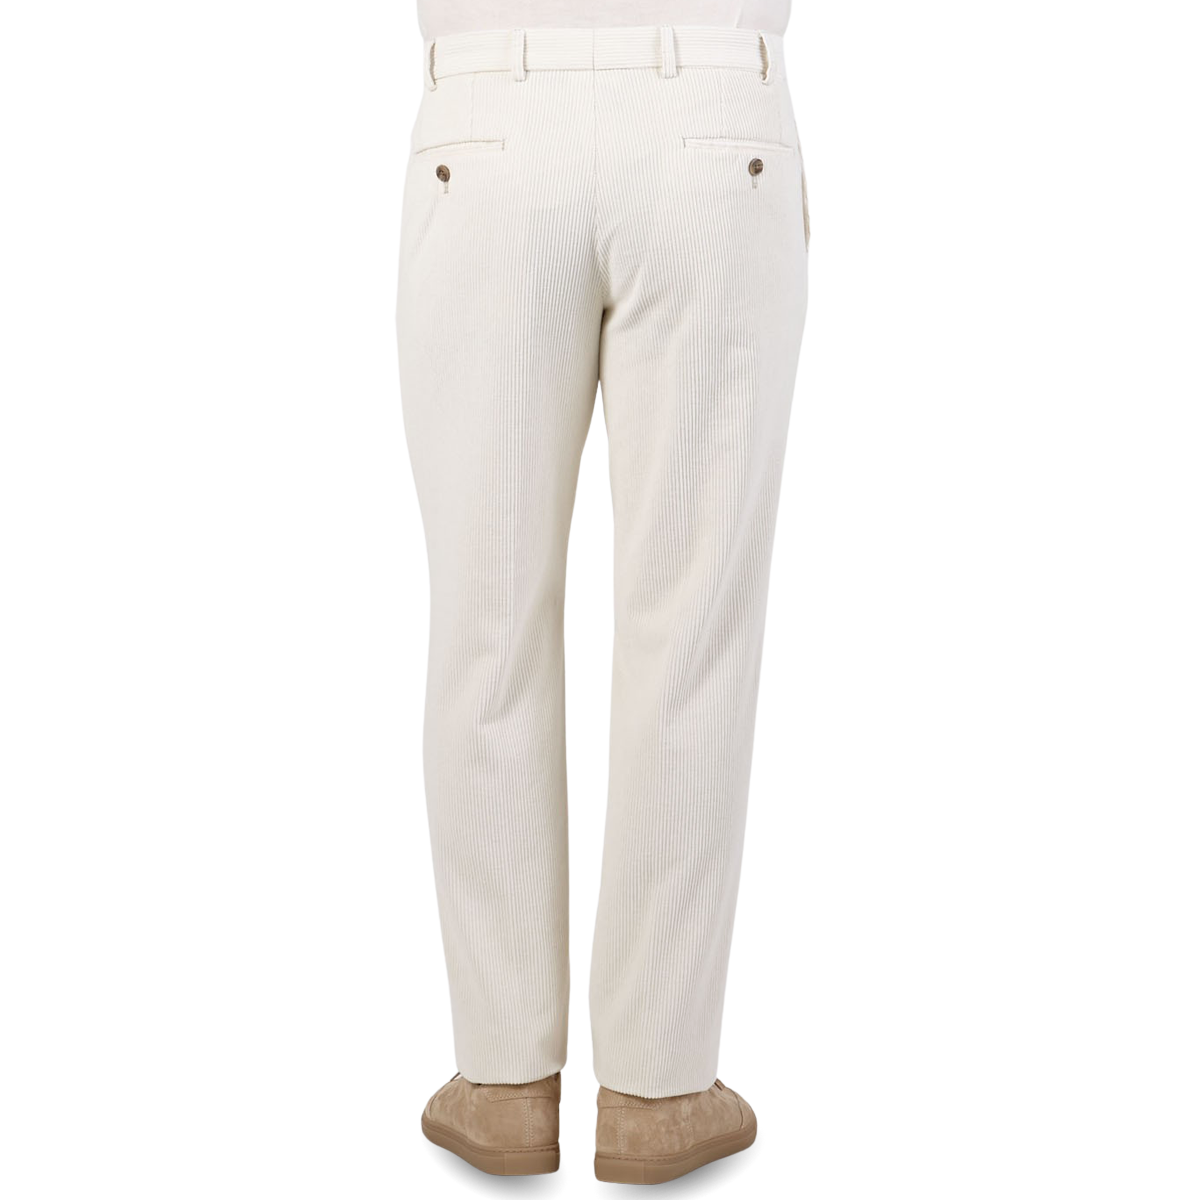 Loose Fit Corduroy pull-on trousers - Cream - Men | H&M IN